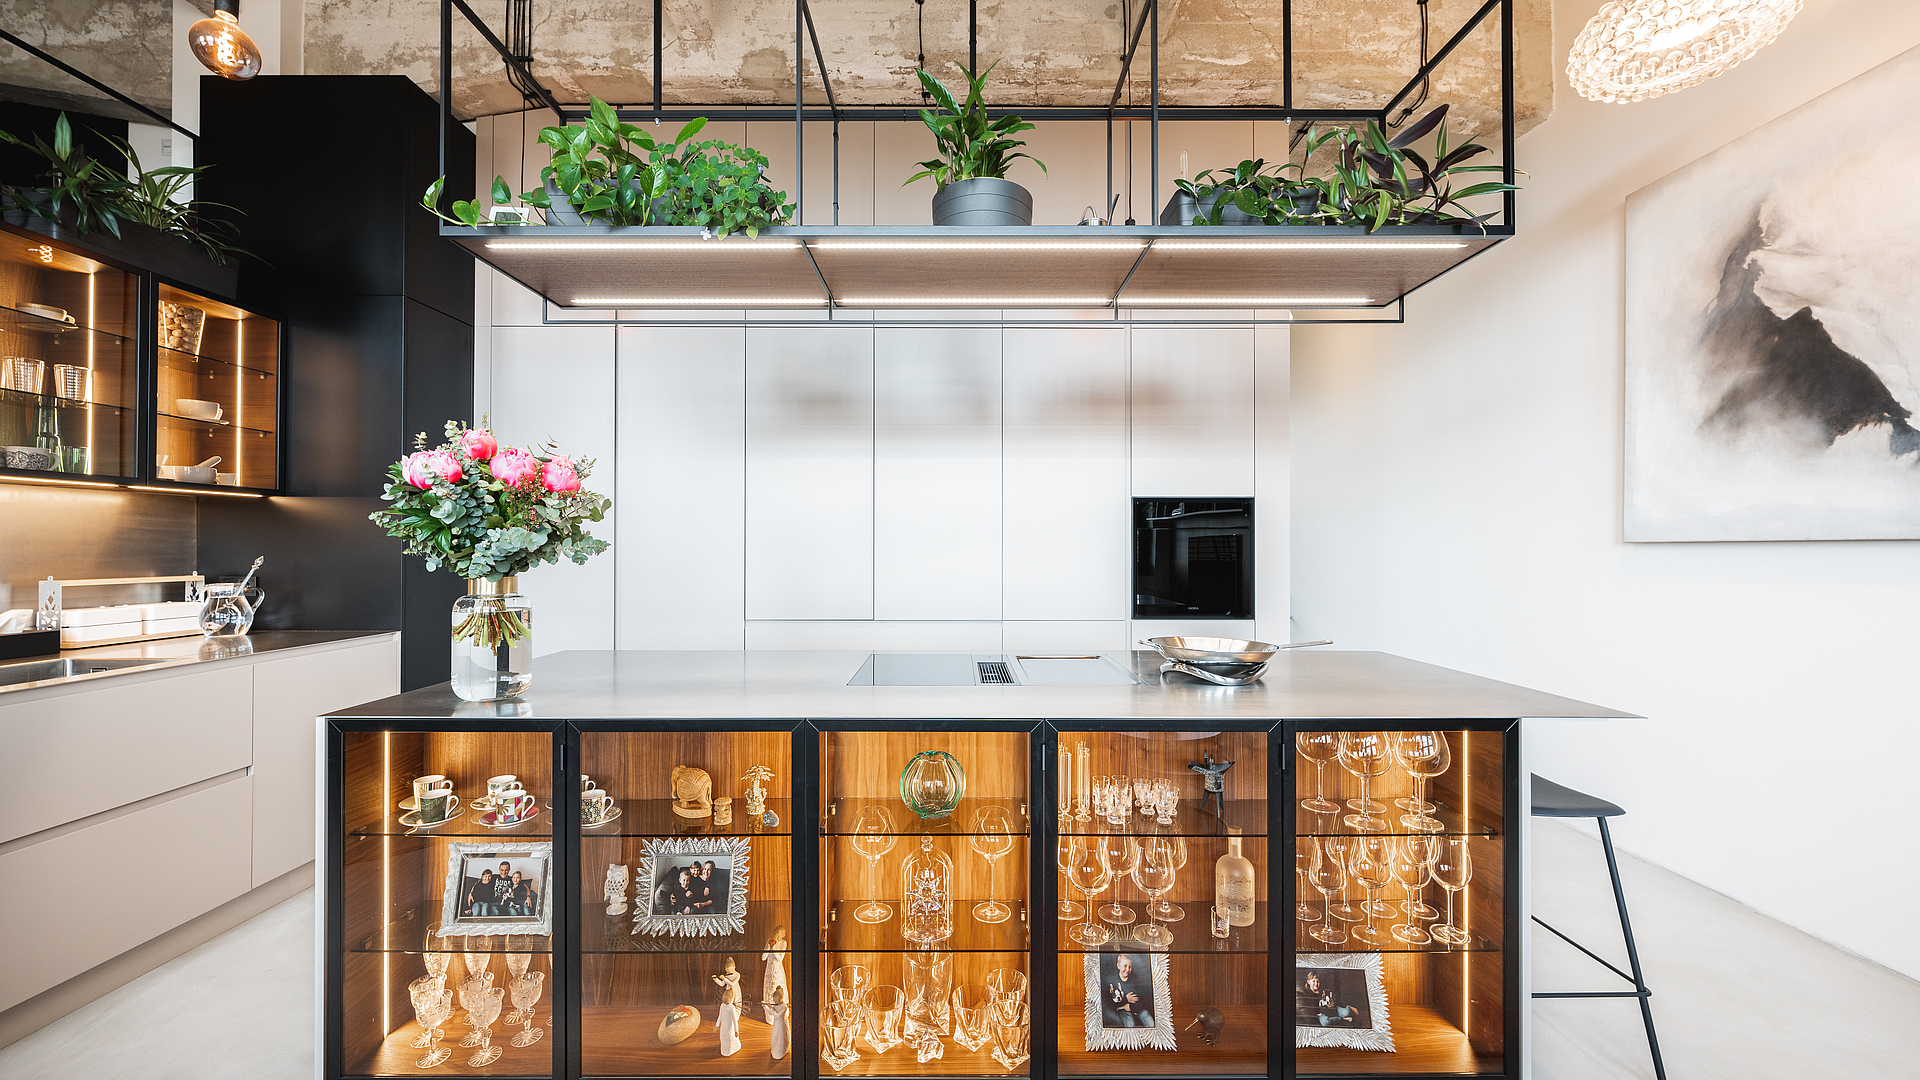 An eye-catching kitchen with an industrial aesthetic  